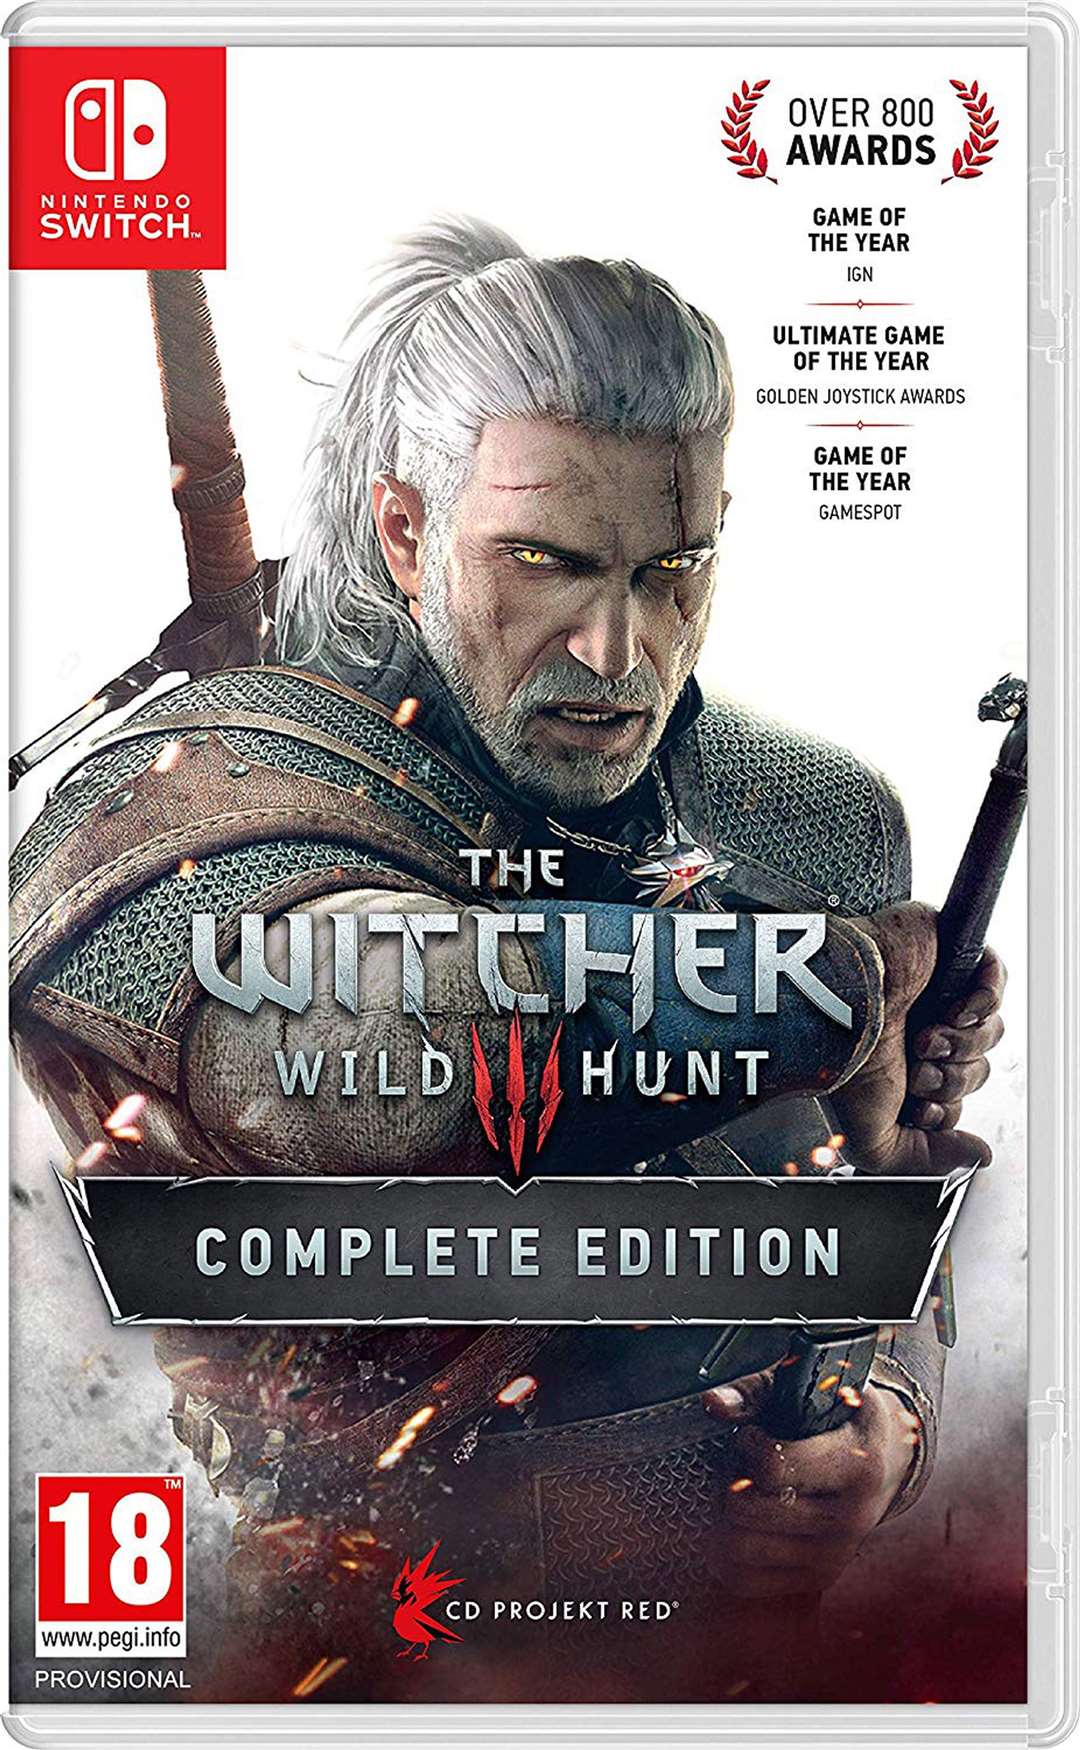 The Witcher 3: Wild Hunt - Complete Edition. Picture: Handout/PA